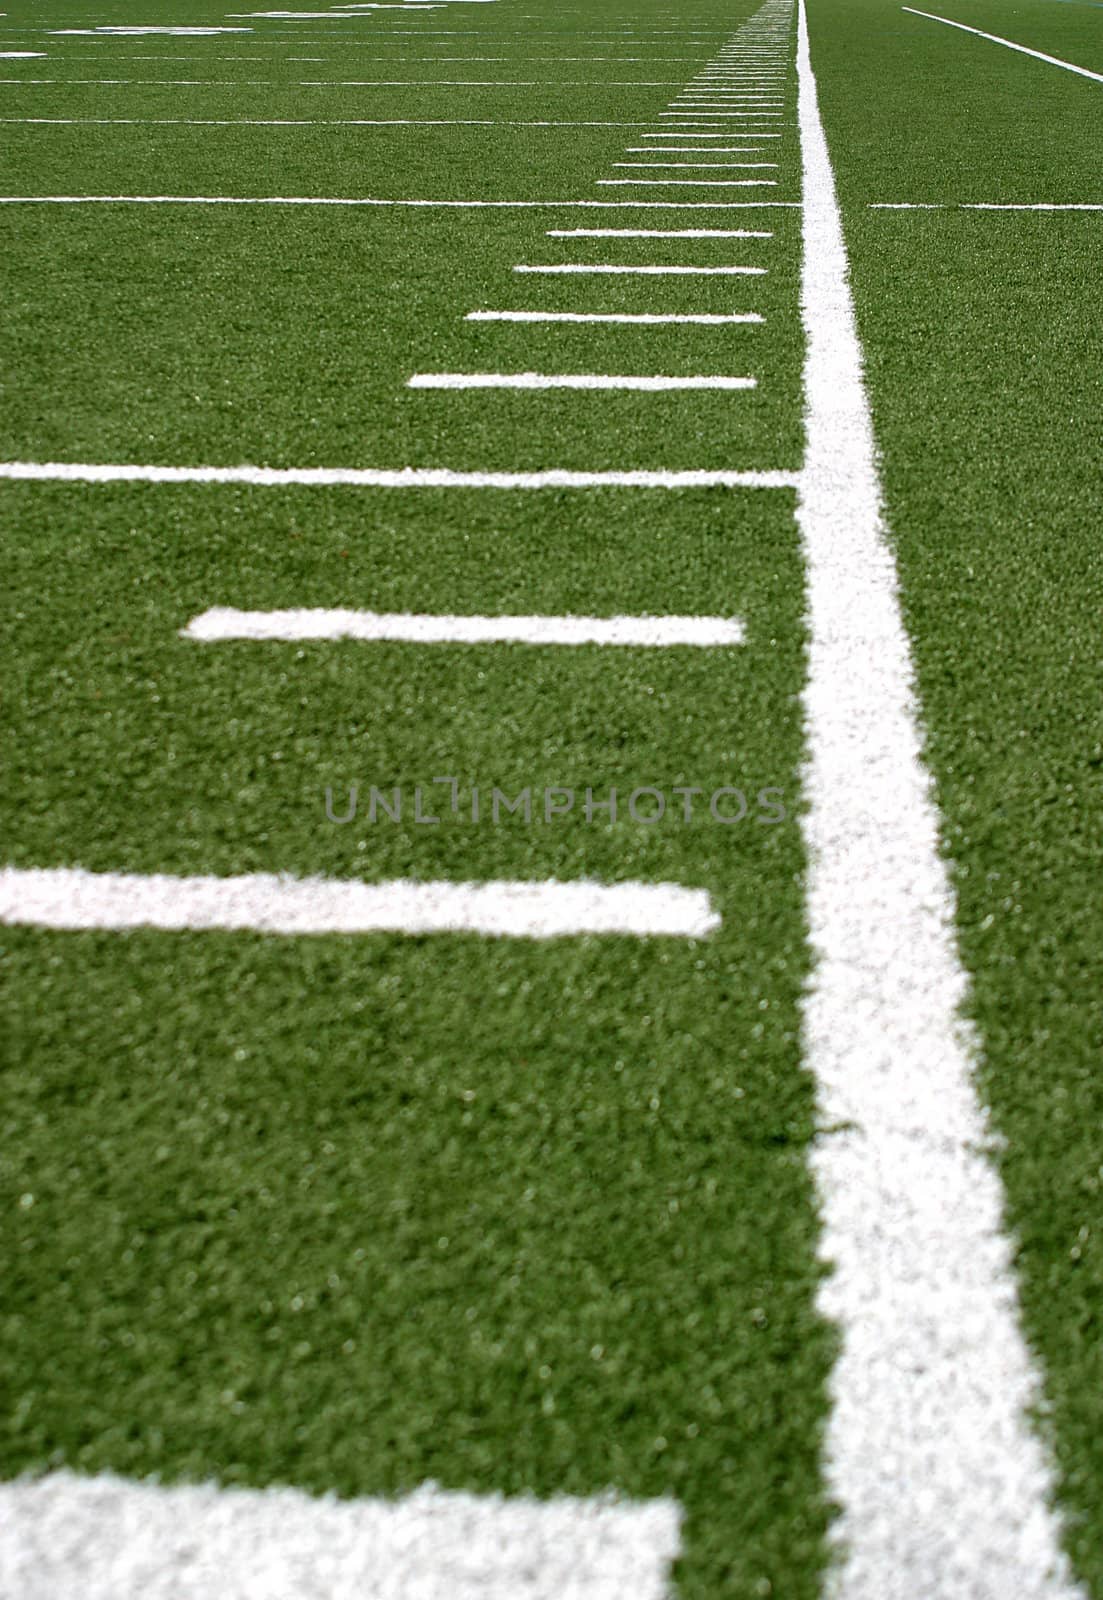 Football Lines by hlehnerer